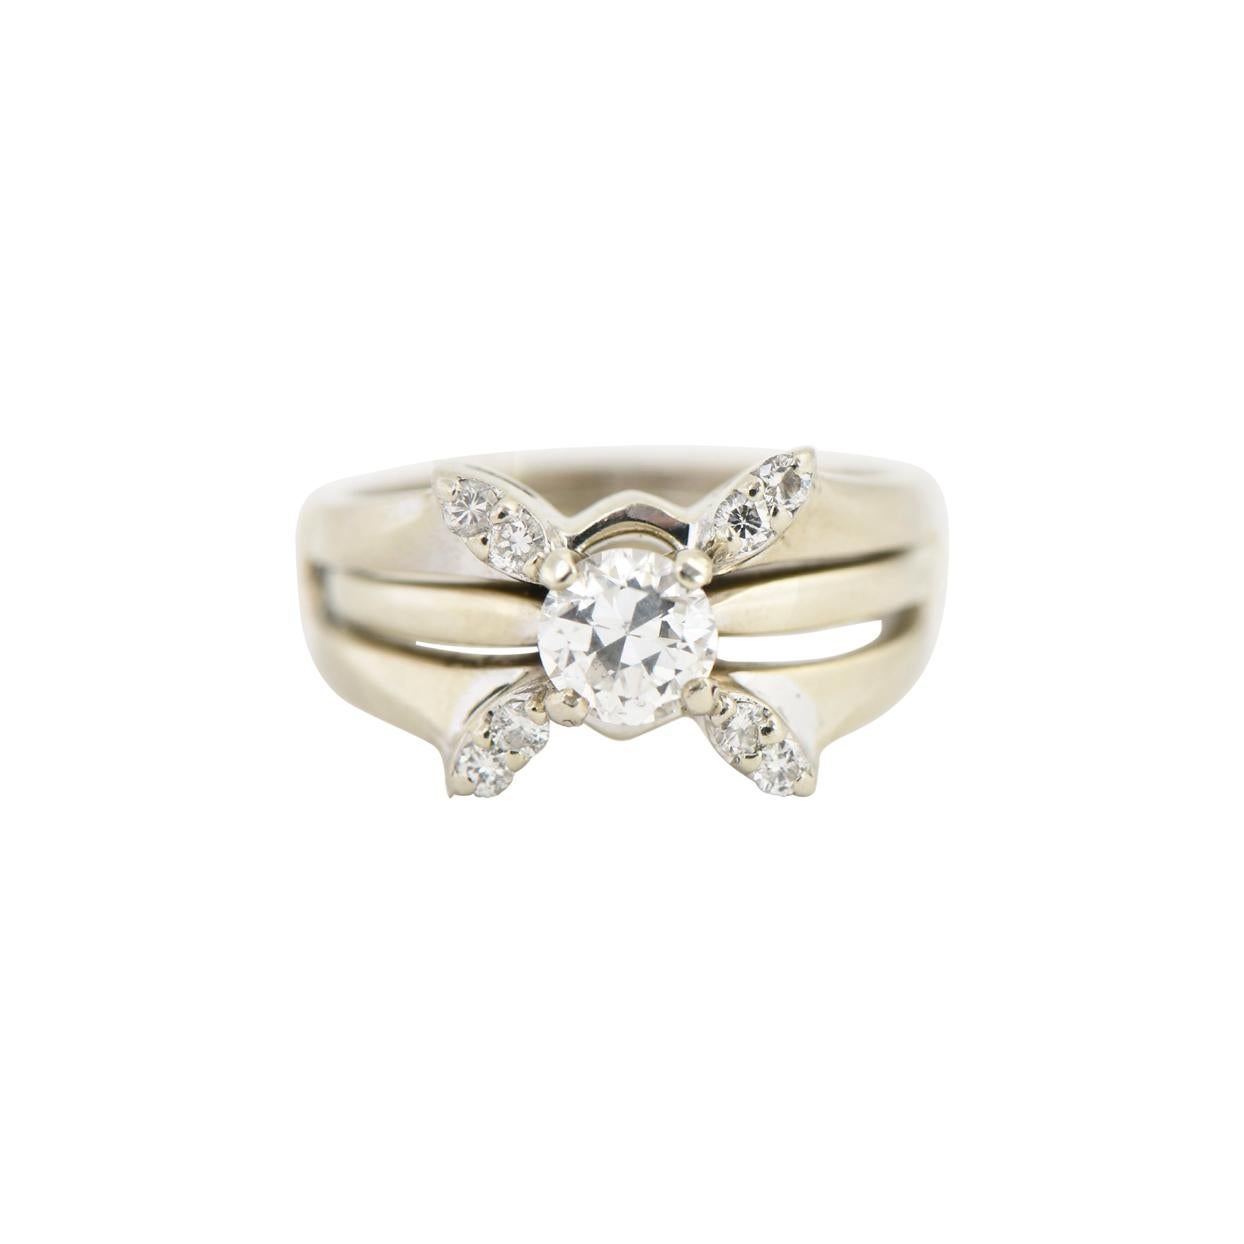 Diamond Solitaire Engagement Ring with Matching Cage Band White Gold